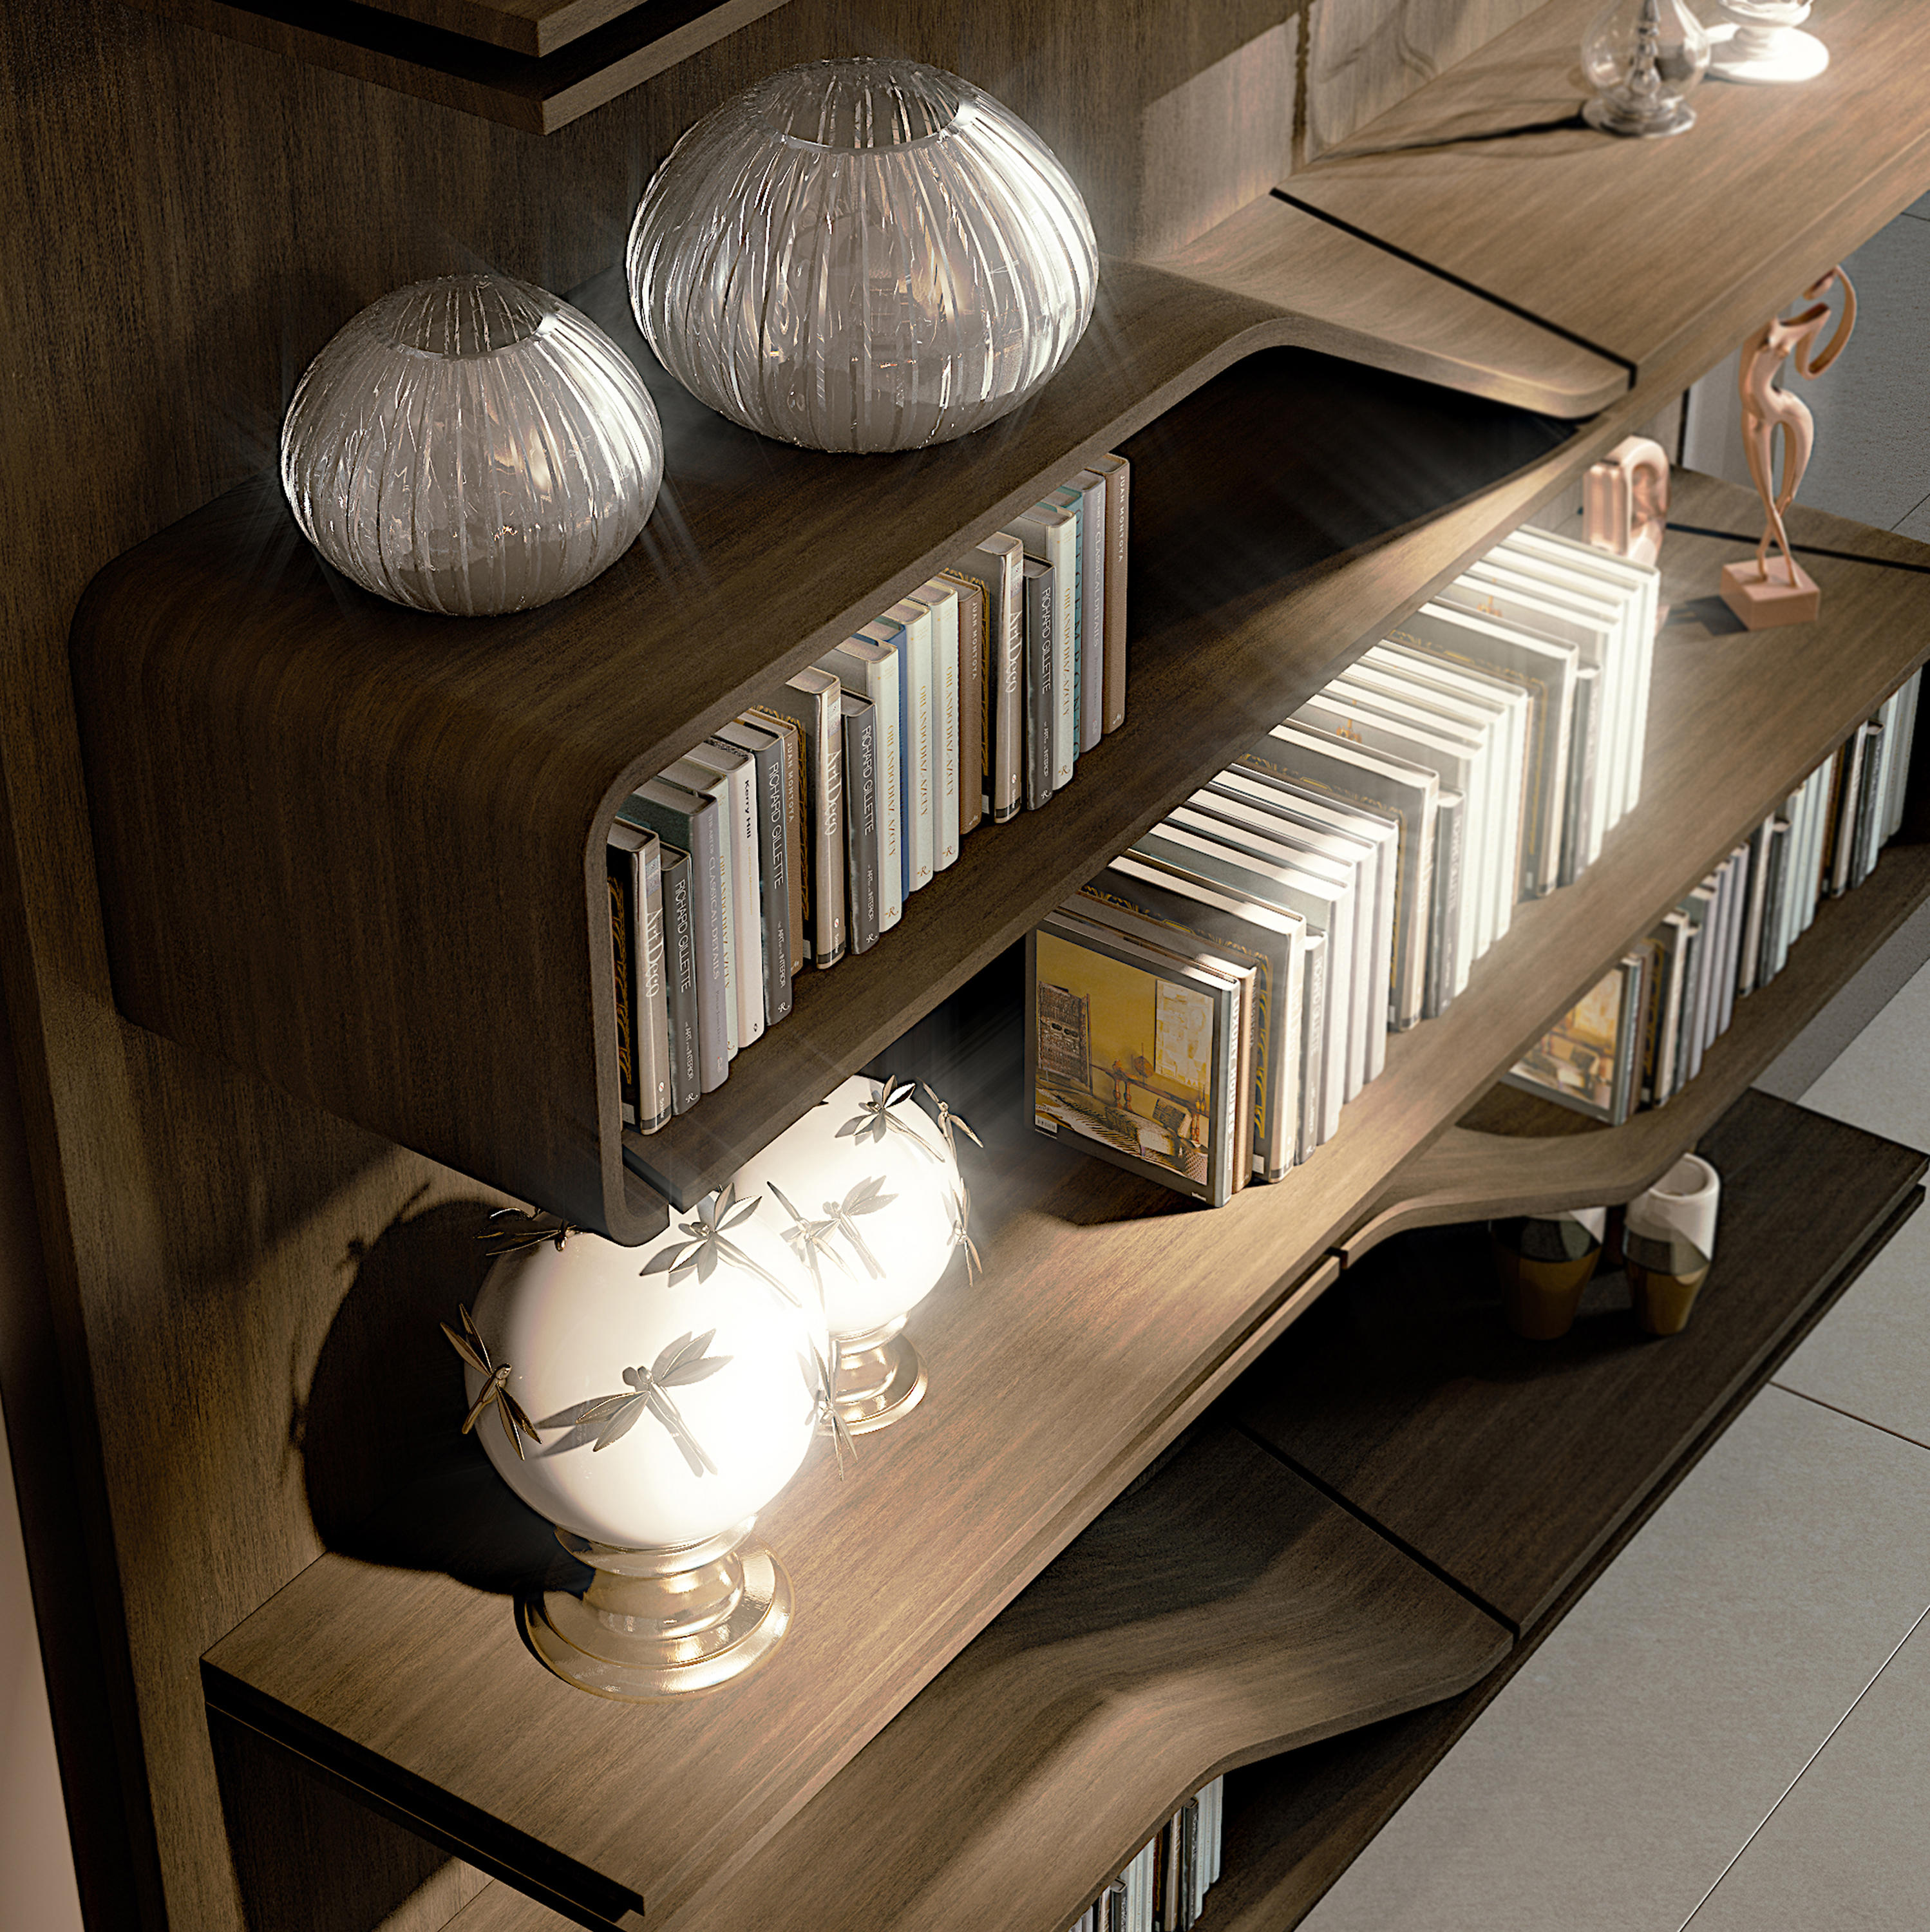 SEGNO Bookcase with built-in lights By Reflex